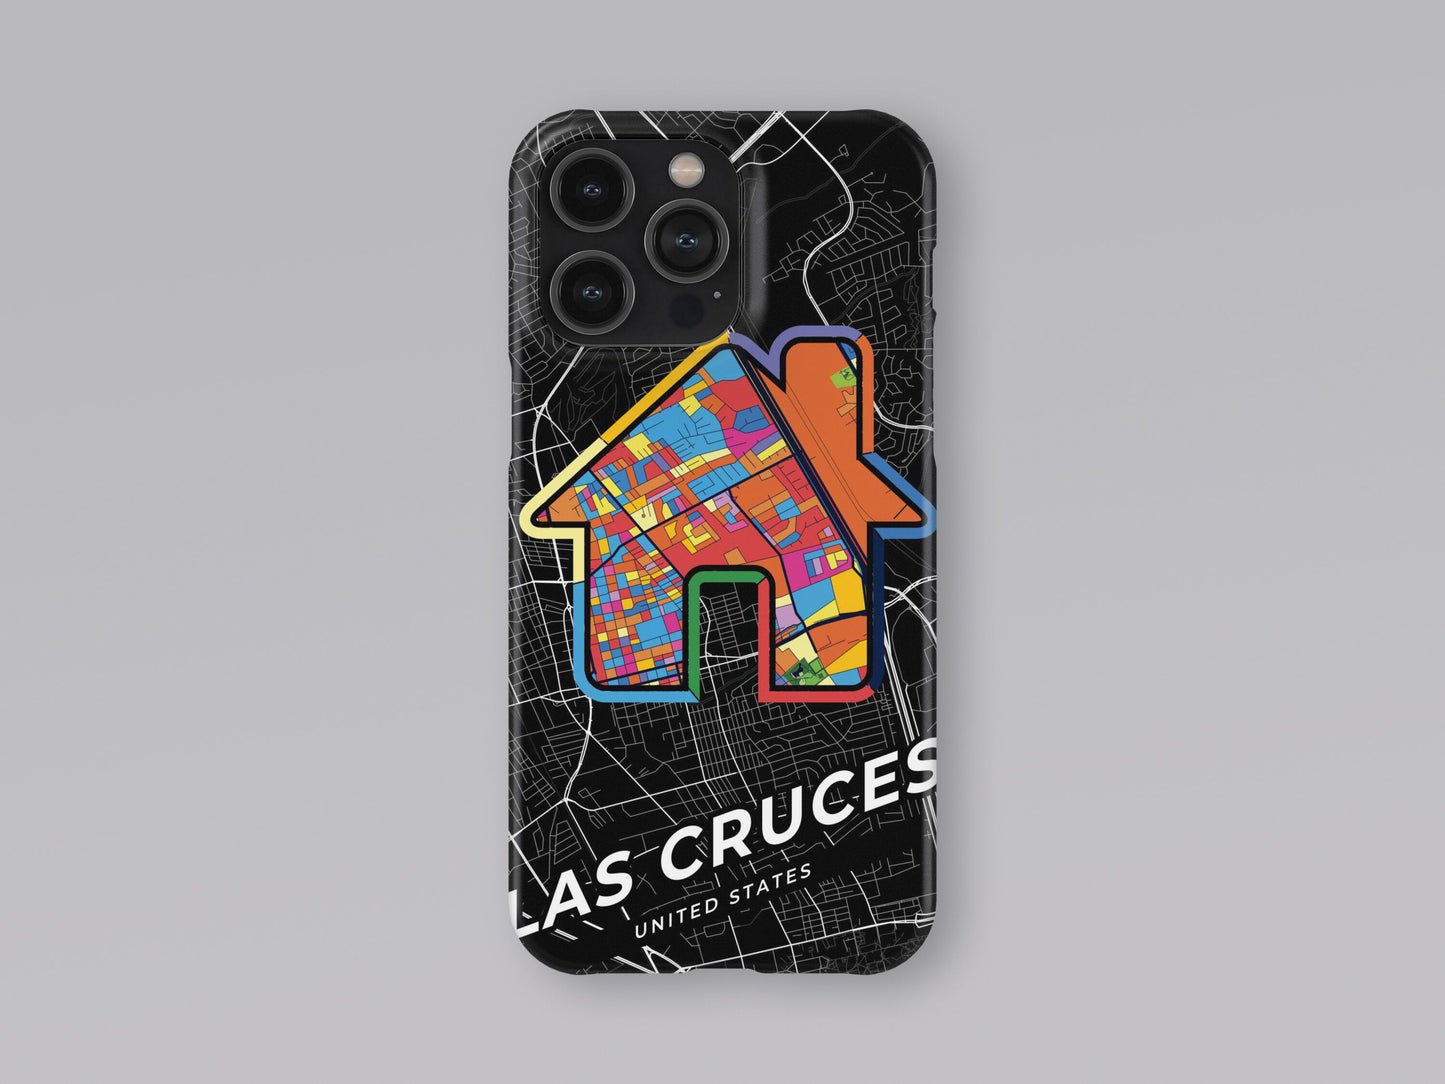 Las Cruces New Mexico slim phone case with colorful icon. Birthday, wedding or housewarming gift. Couple match cases. 3